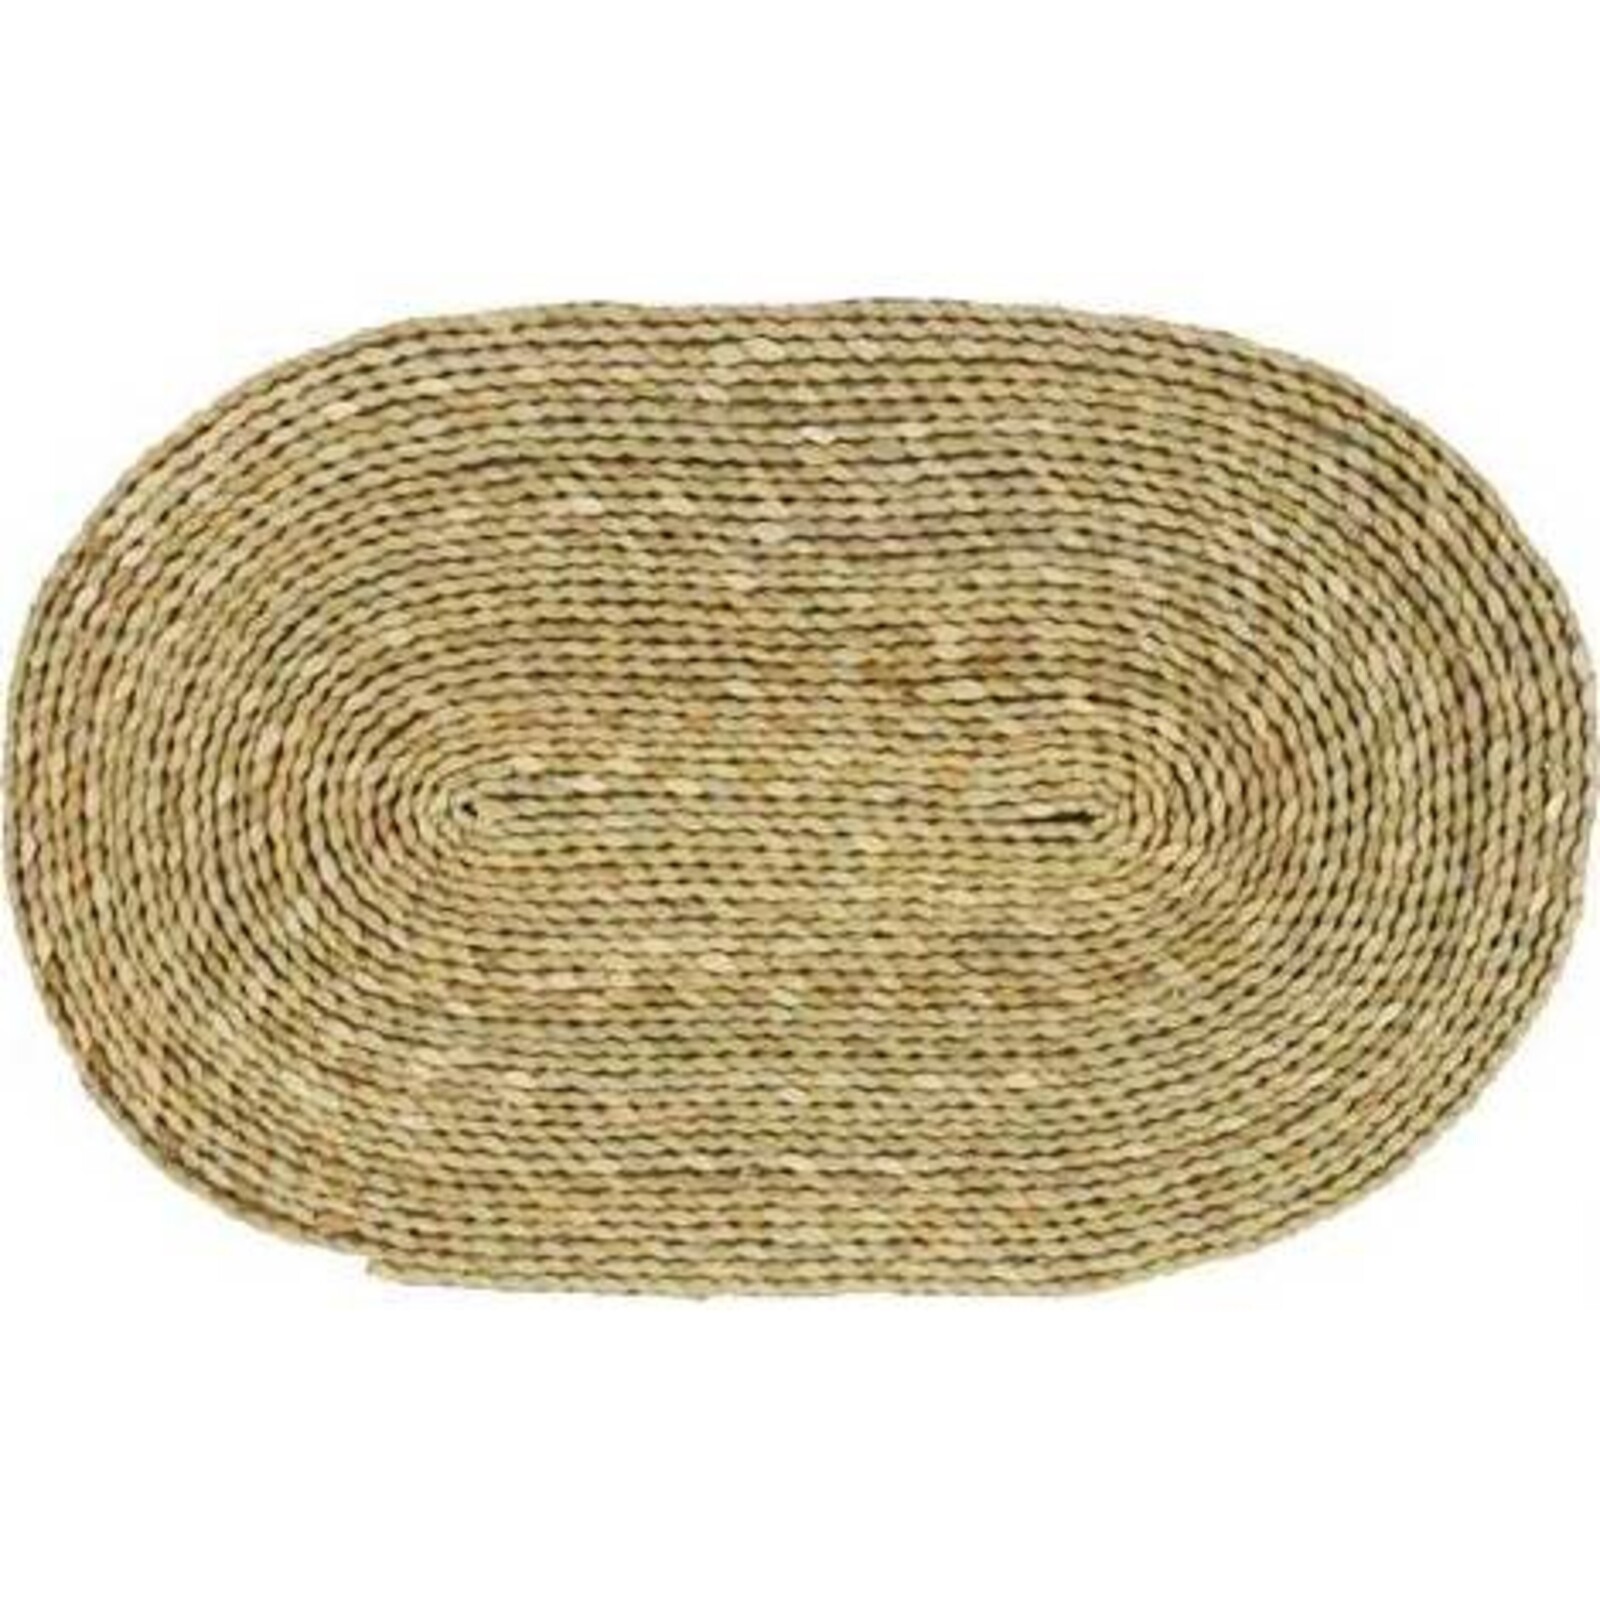 Placemat Natural Weave Oval